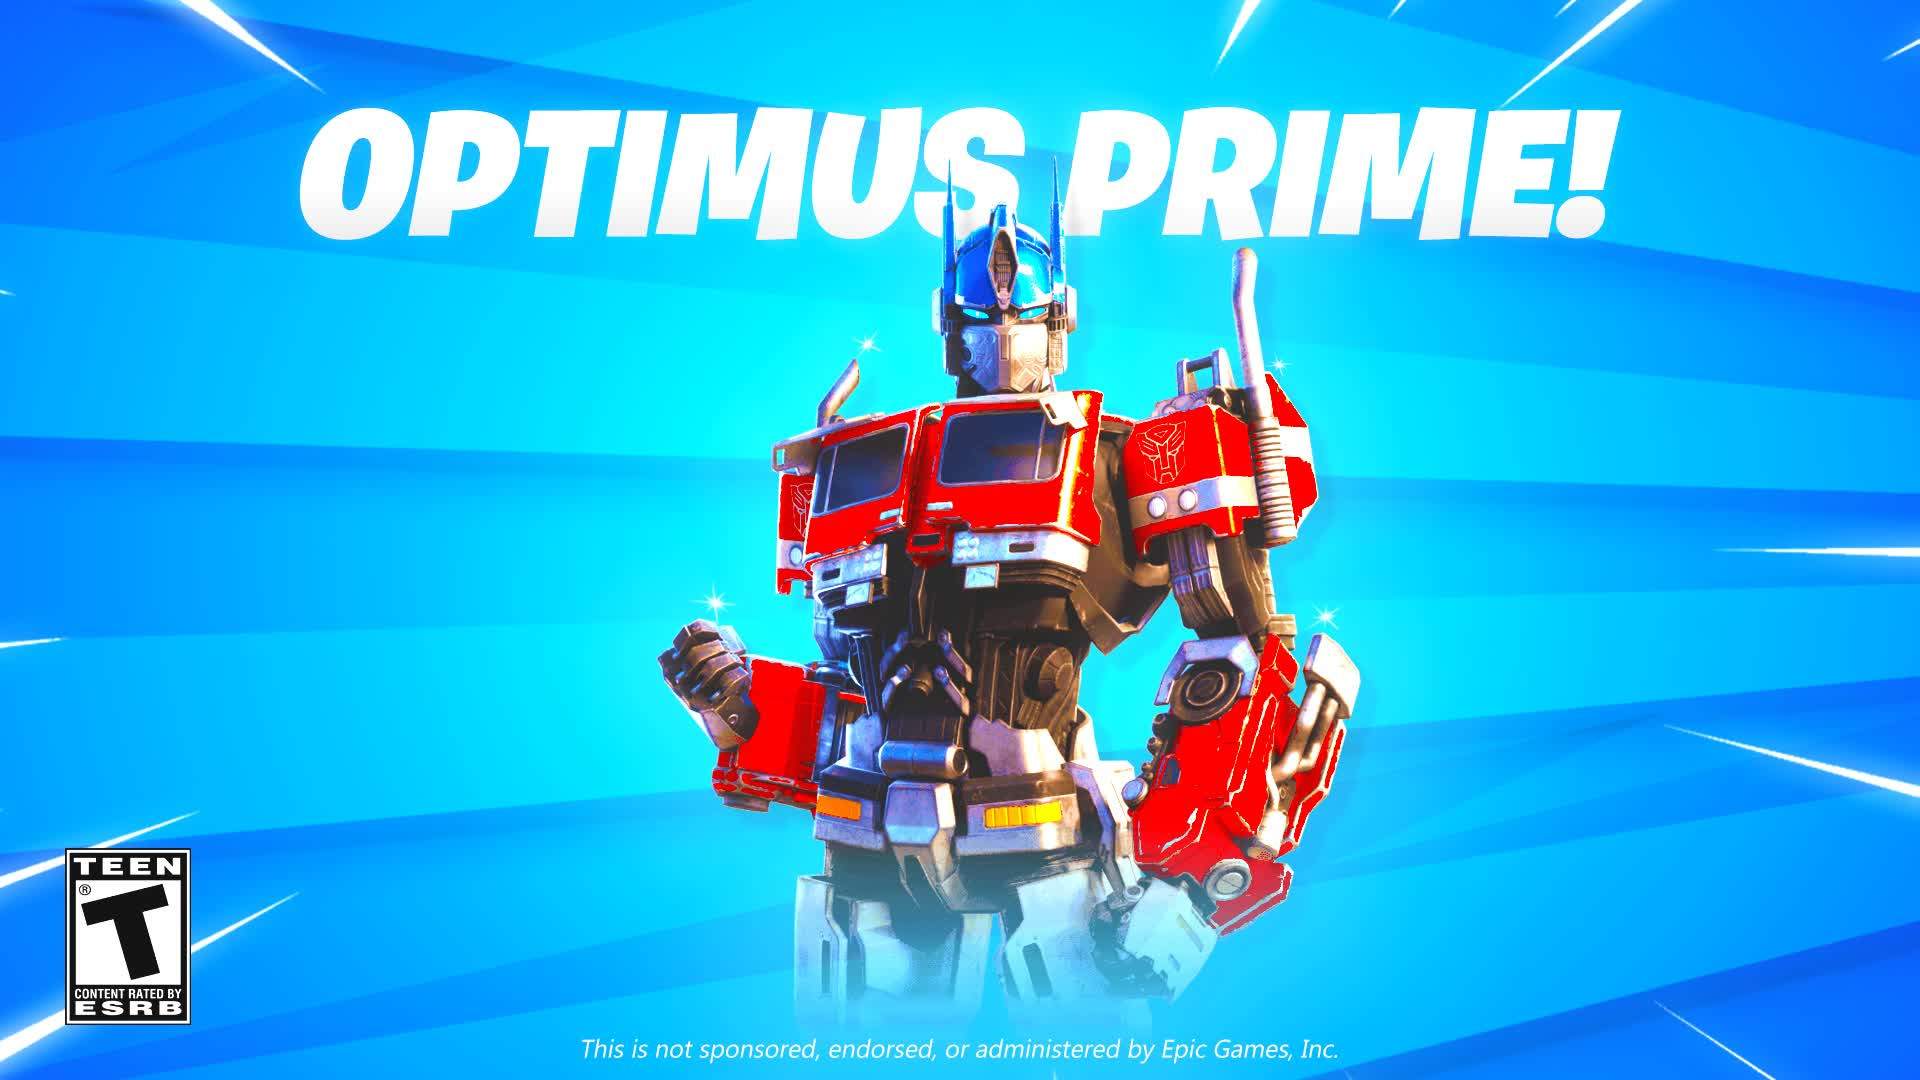 🚚 Optimus Prime - FREE FOR ALL 🚚